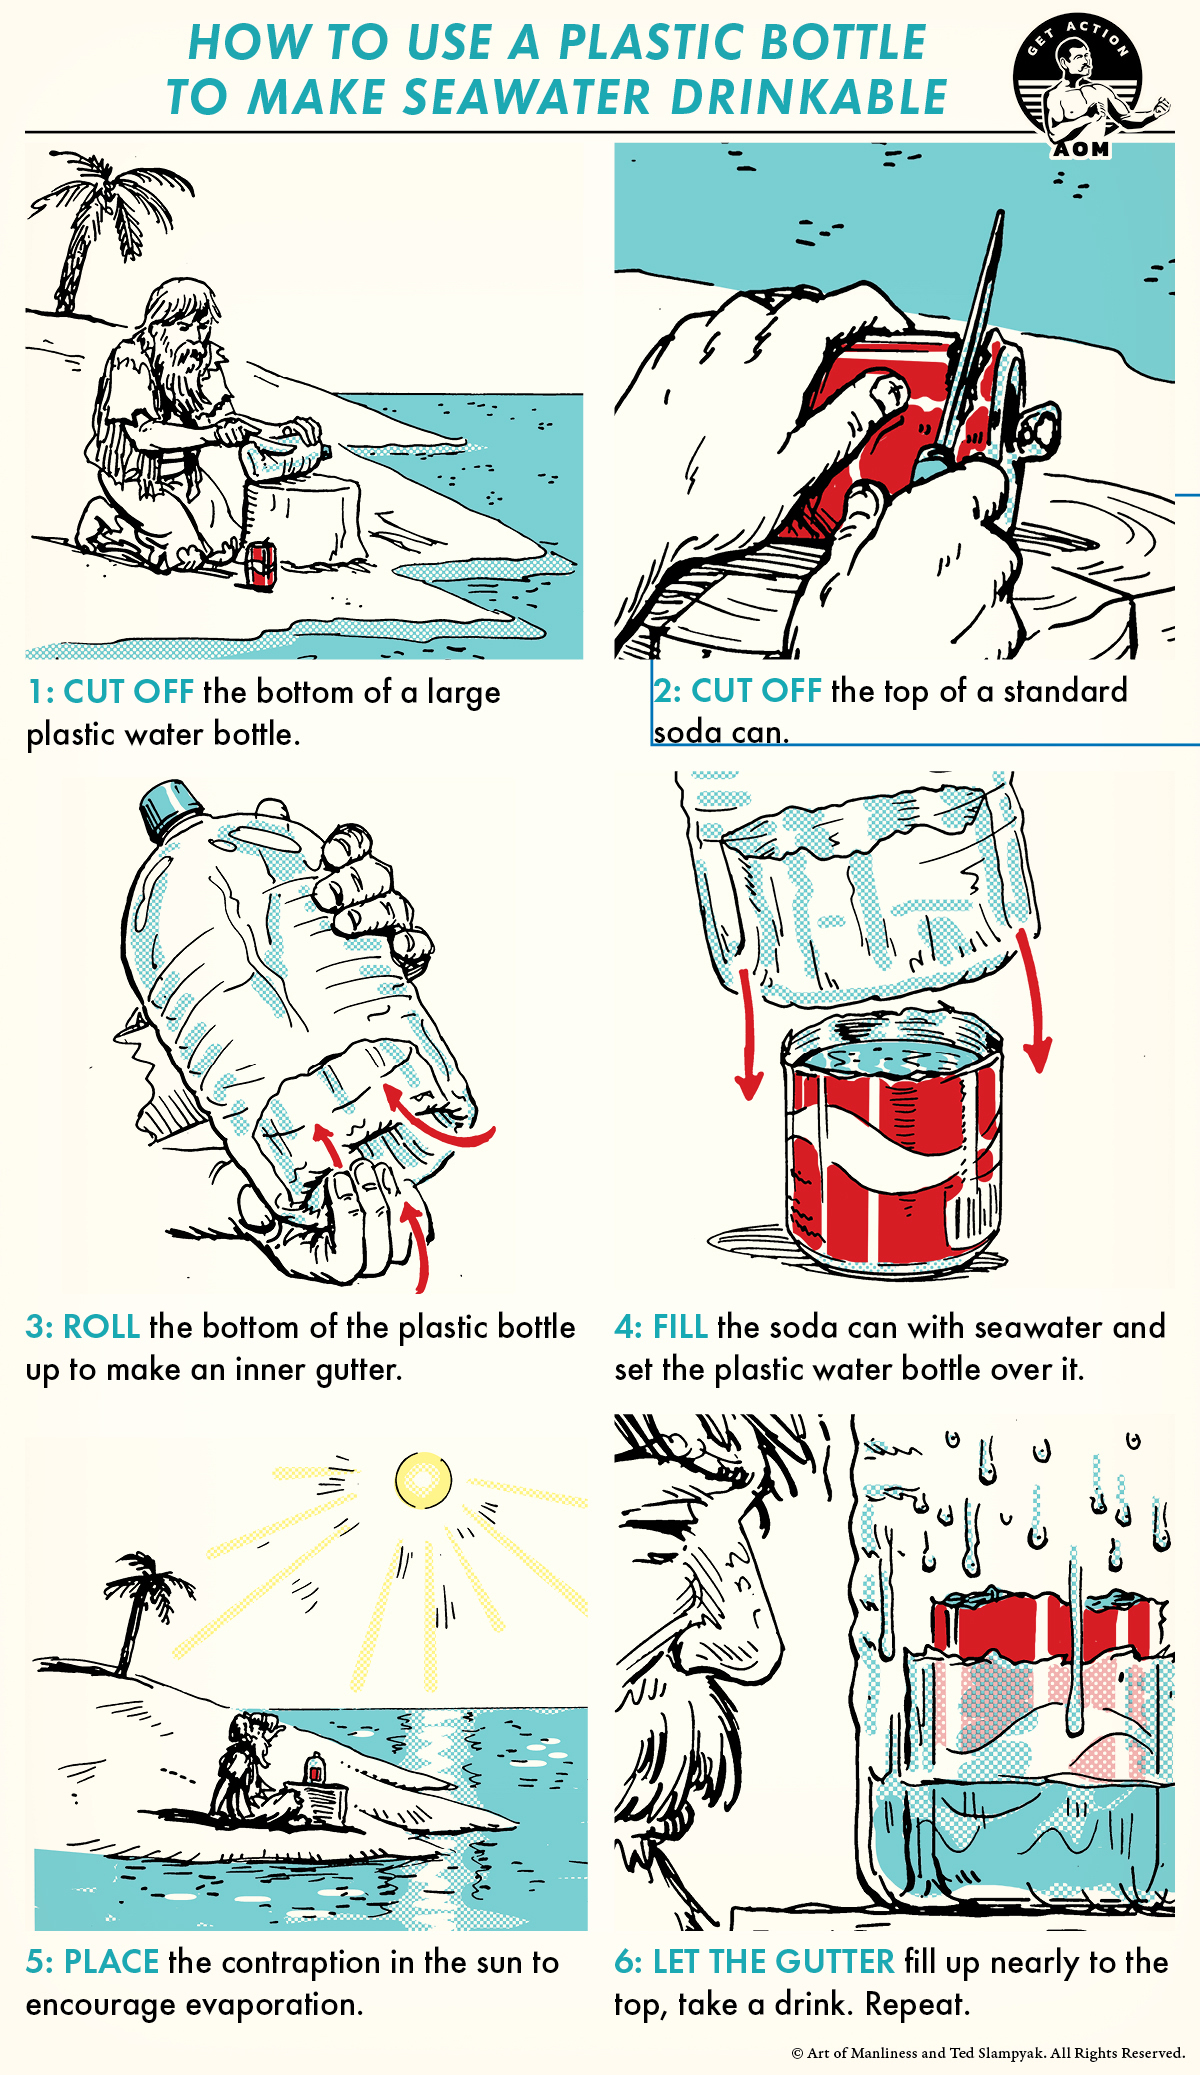 sea water drinkable - How To Use A Plastic Bottle To Make Seawater Drinkable 1 Cut Off the bottom of a large plastic water bottle 2 Cut Off the top of a standard Bodo can 3 Roll the bottom of the plastic bottle & Fill the soda con with water and up to mak